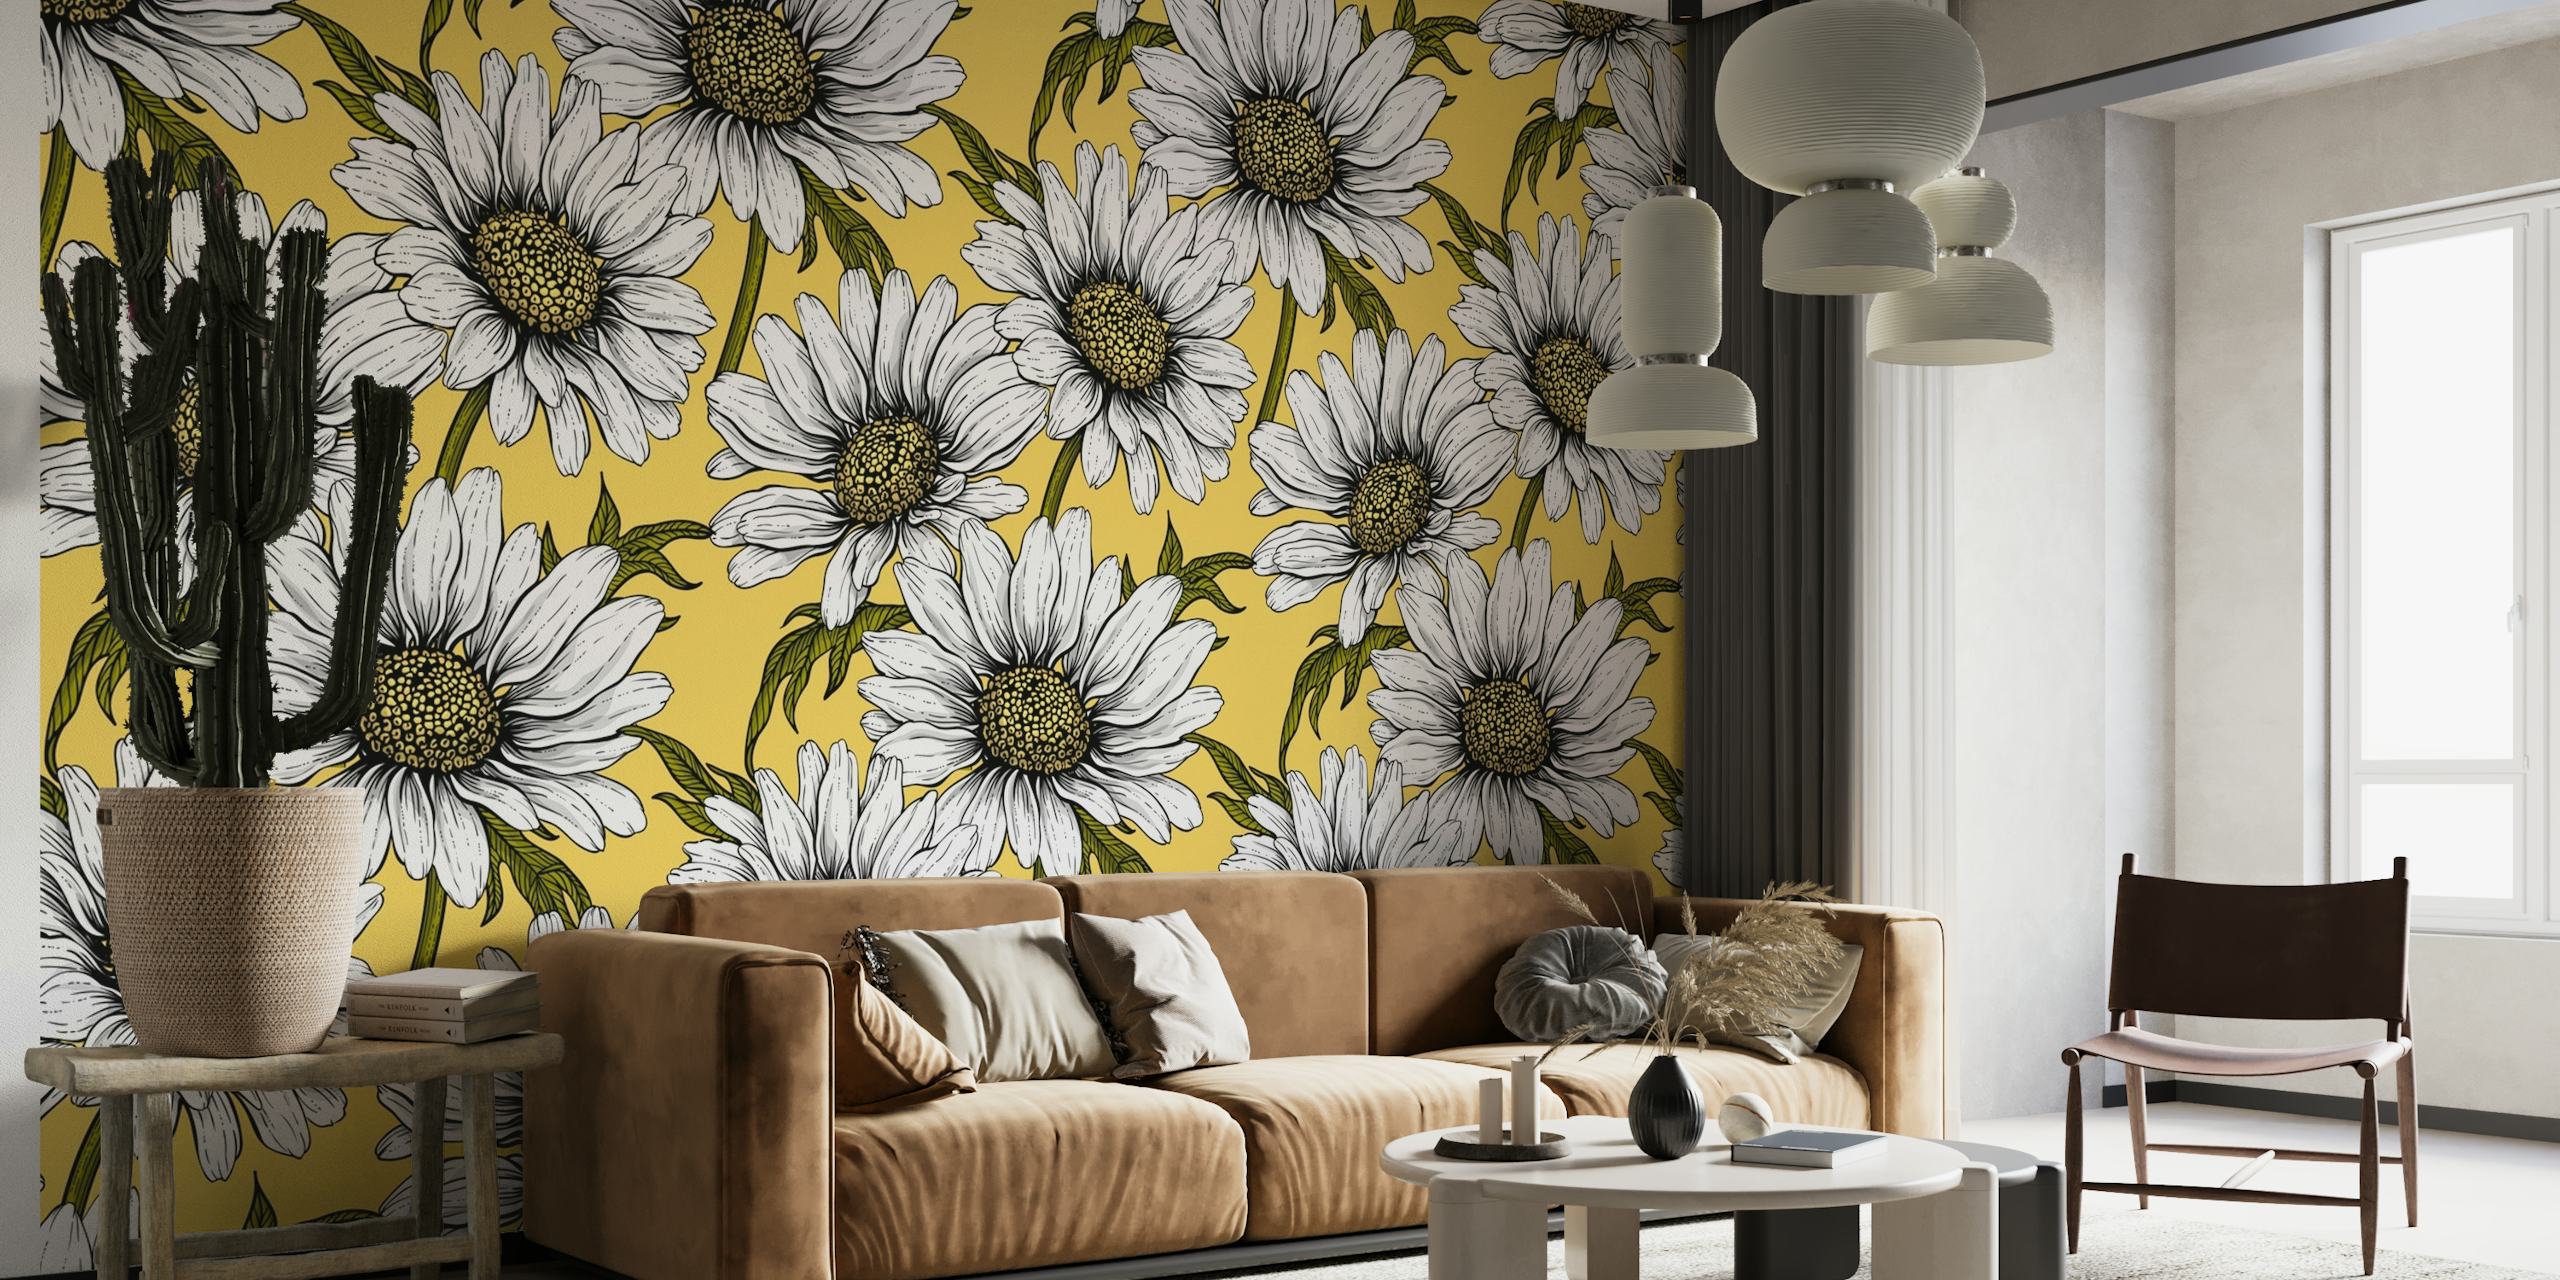 Daisies on Yellow Wall Mural with white flowers on a bright yellow background